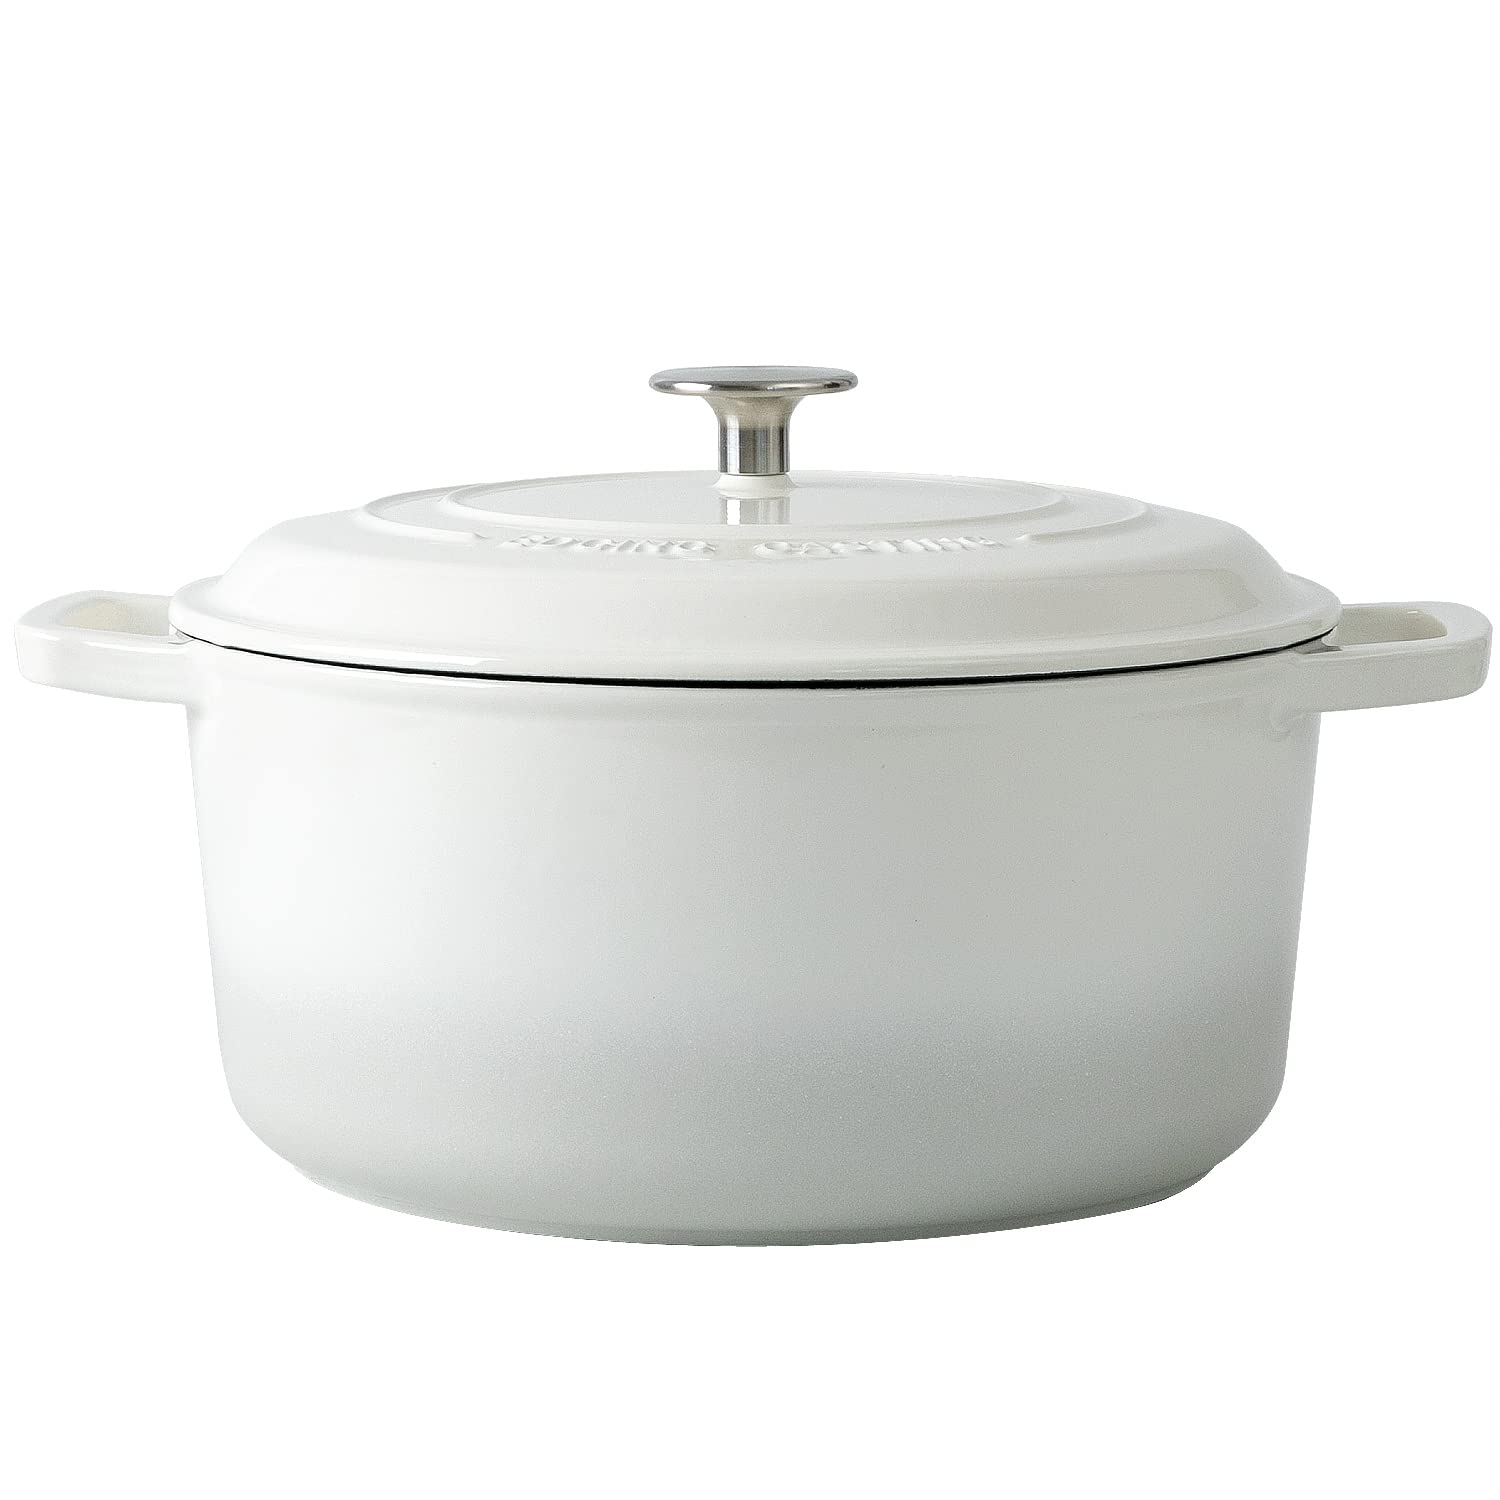 EDGING CASTING Enameled Cast Iron Dutch Oven Pot with Lid, 6-Quart Round Dutch Ovens Dual Handle, Bread Oven for Bread Baking, Oven Safe up to 500°F, White